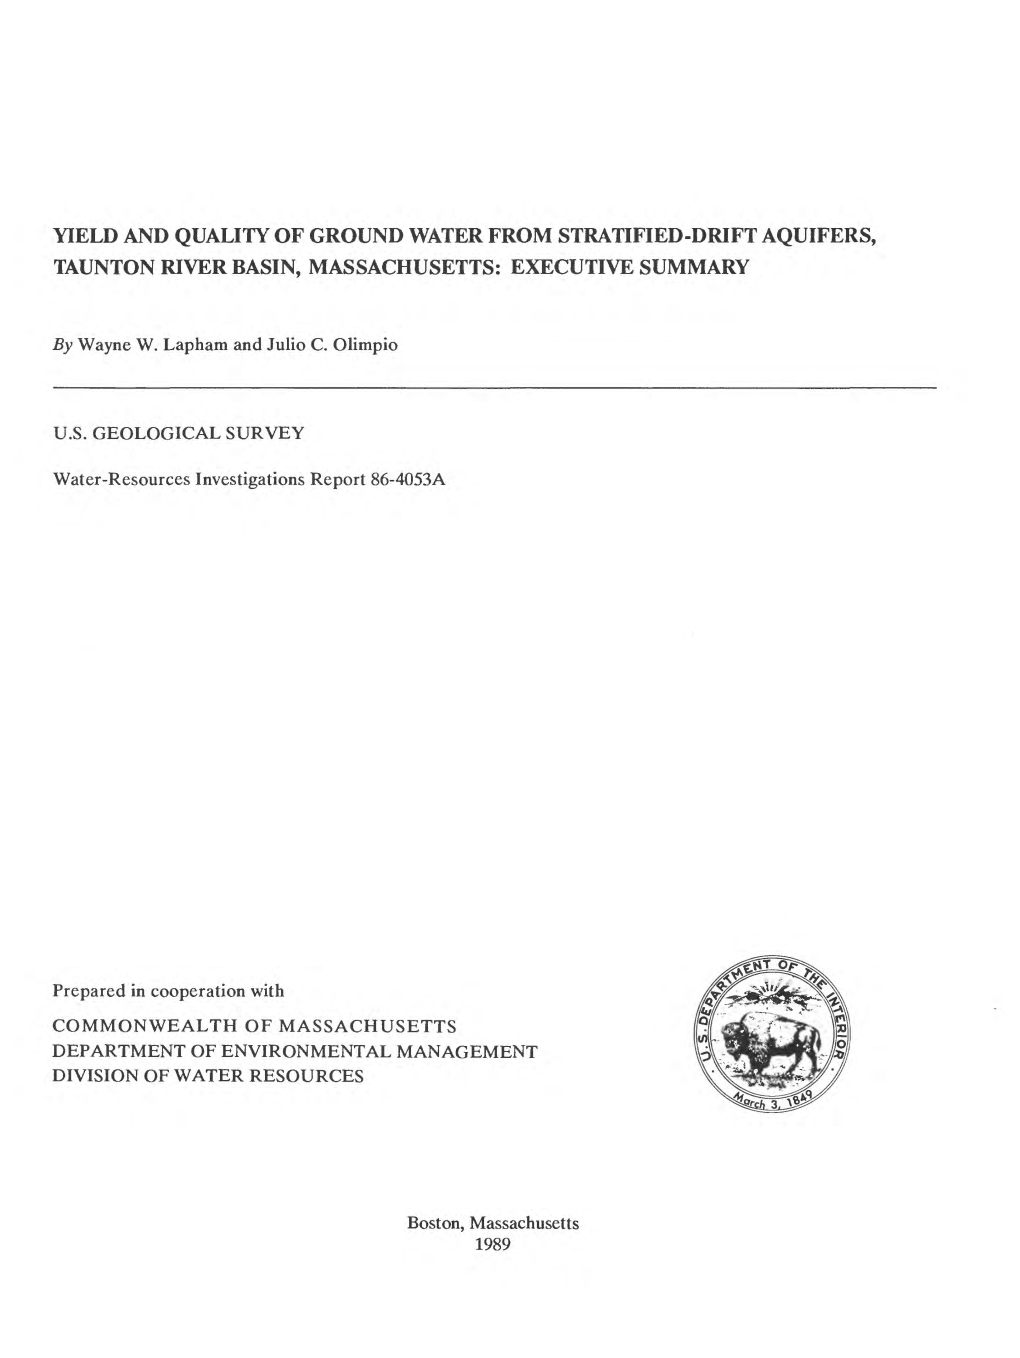 Yield and Quality of Ground Water from Stratified-Drift Aquifers, Taunton River Basin, Massachusetts: Executive Summary